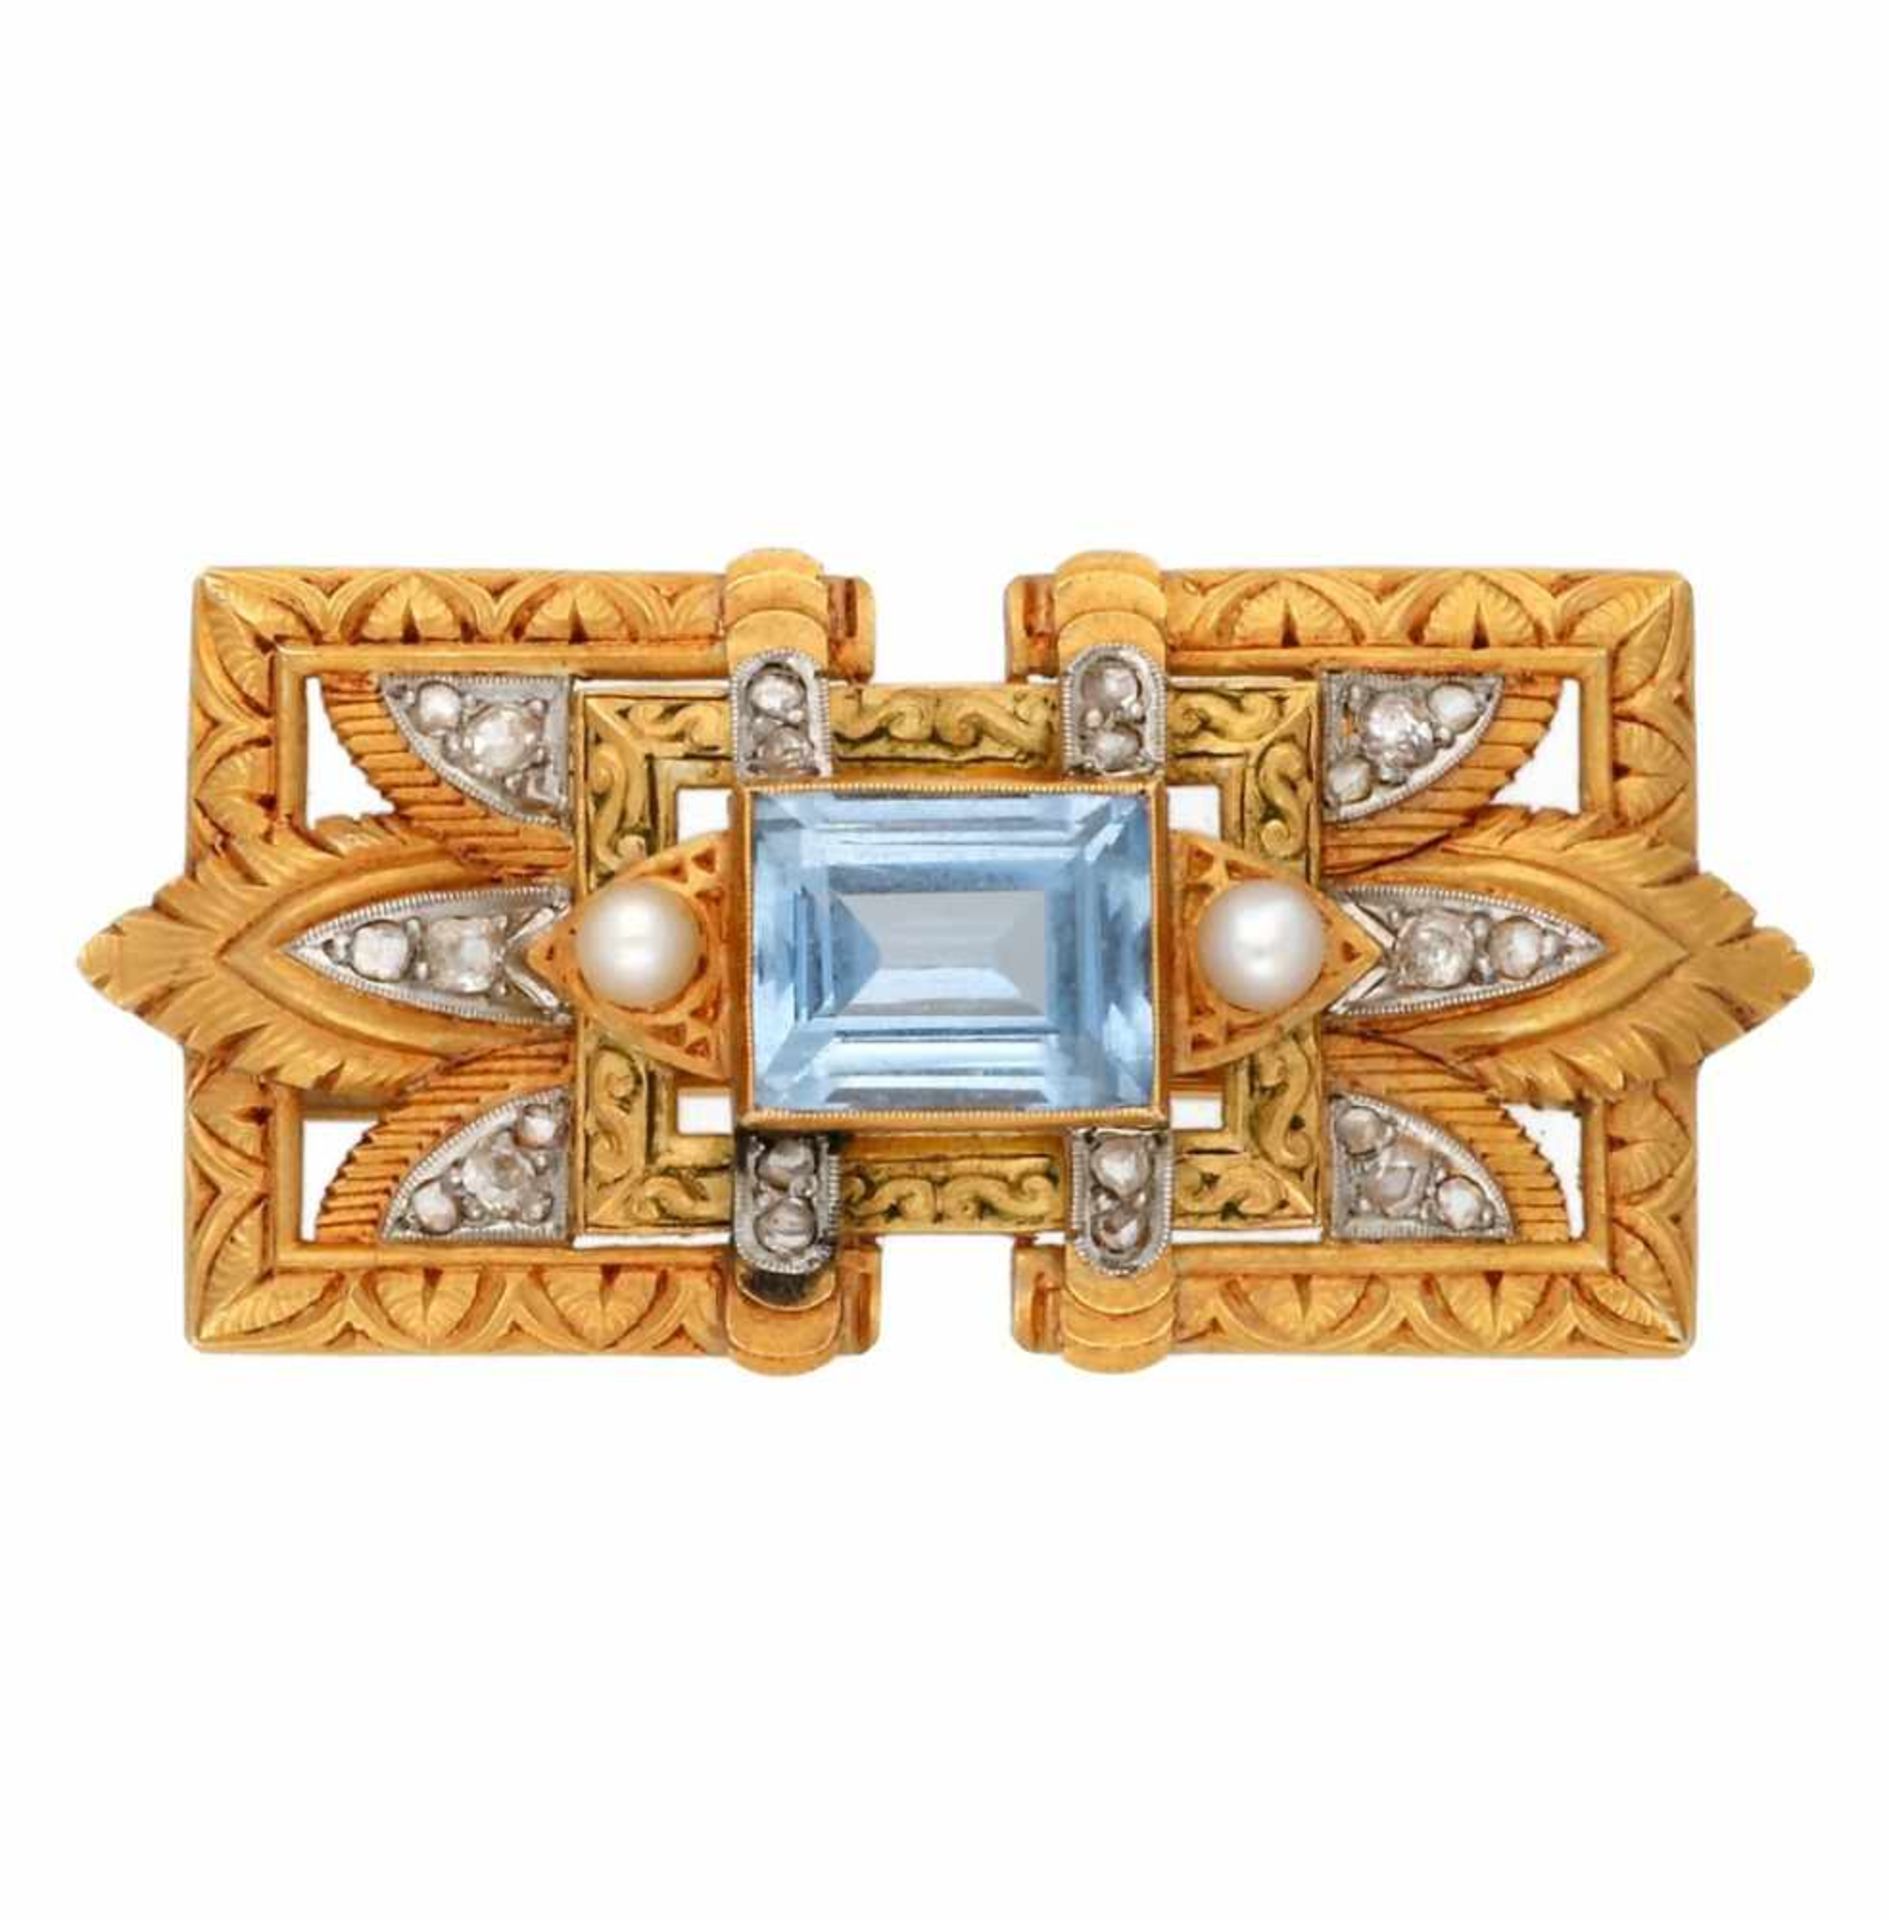 Noucentist gold brooch, circa 1930.Gold with platinum views, synthetic blue spinel, old brilliant